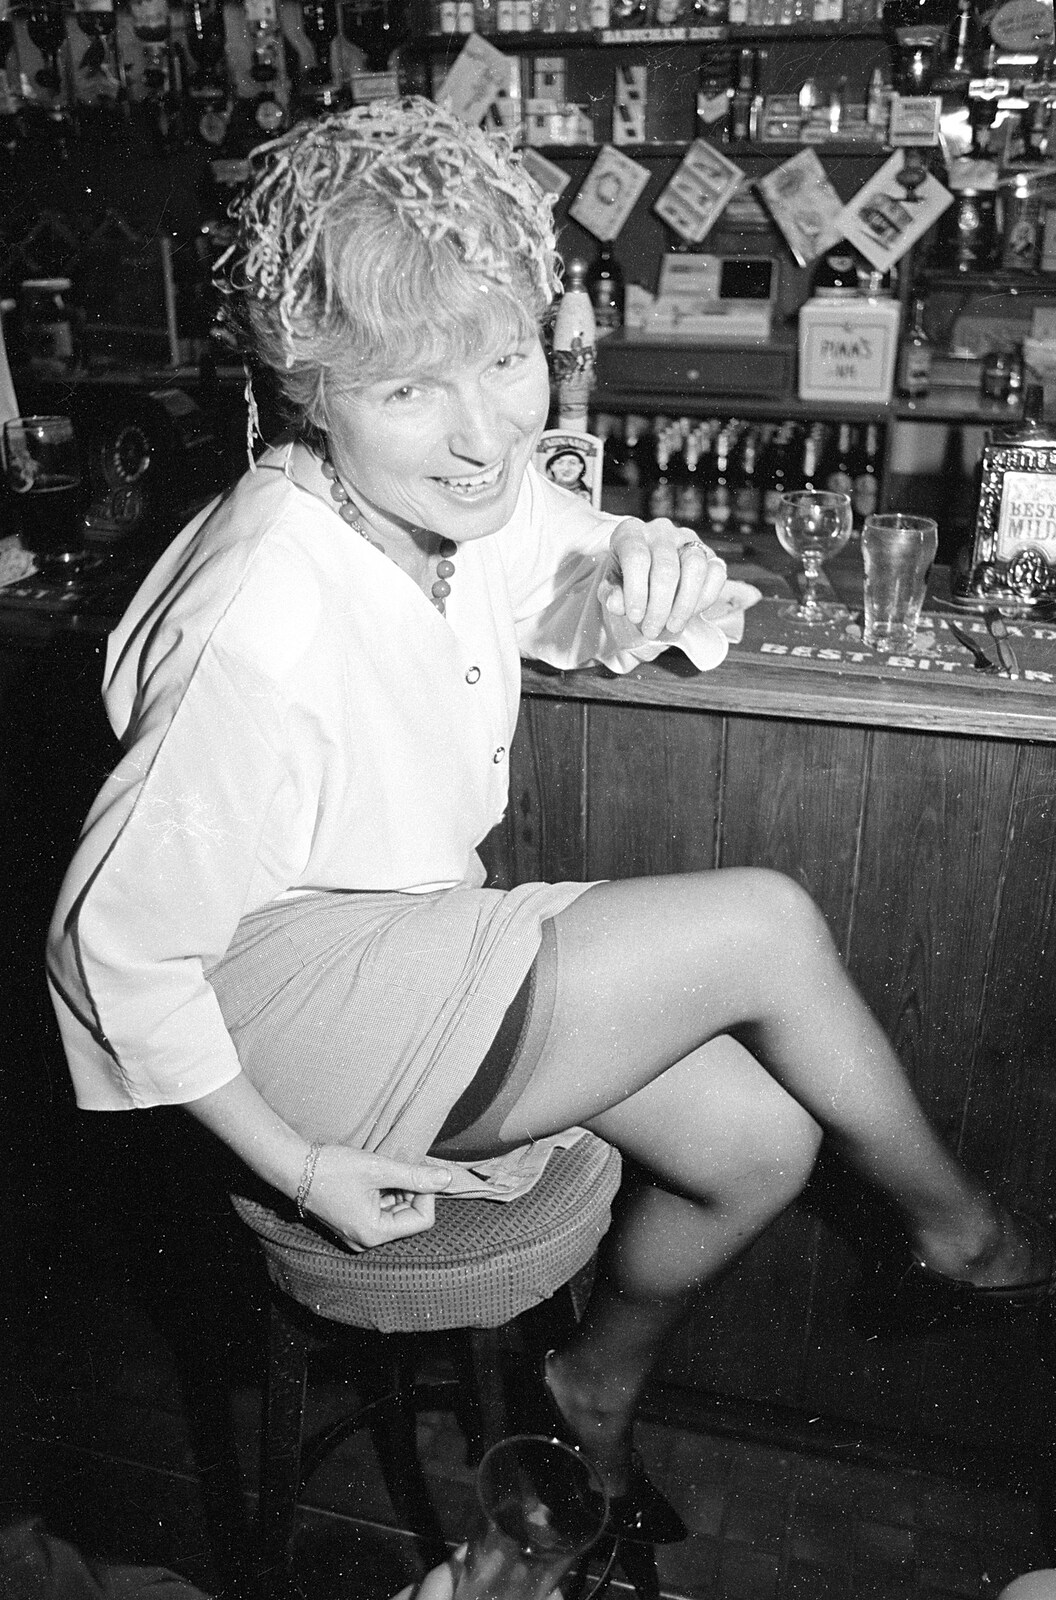 Spammy at the bar from New Year's Eve at the Swan Inn, Brome, Suffolk - 31st December 1992